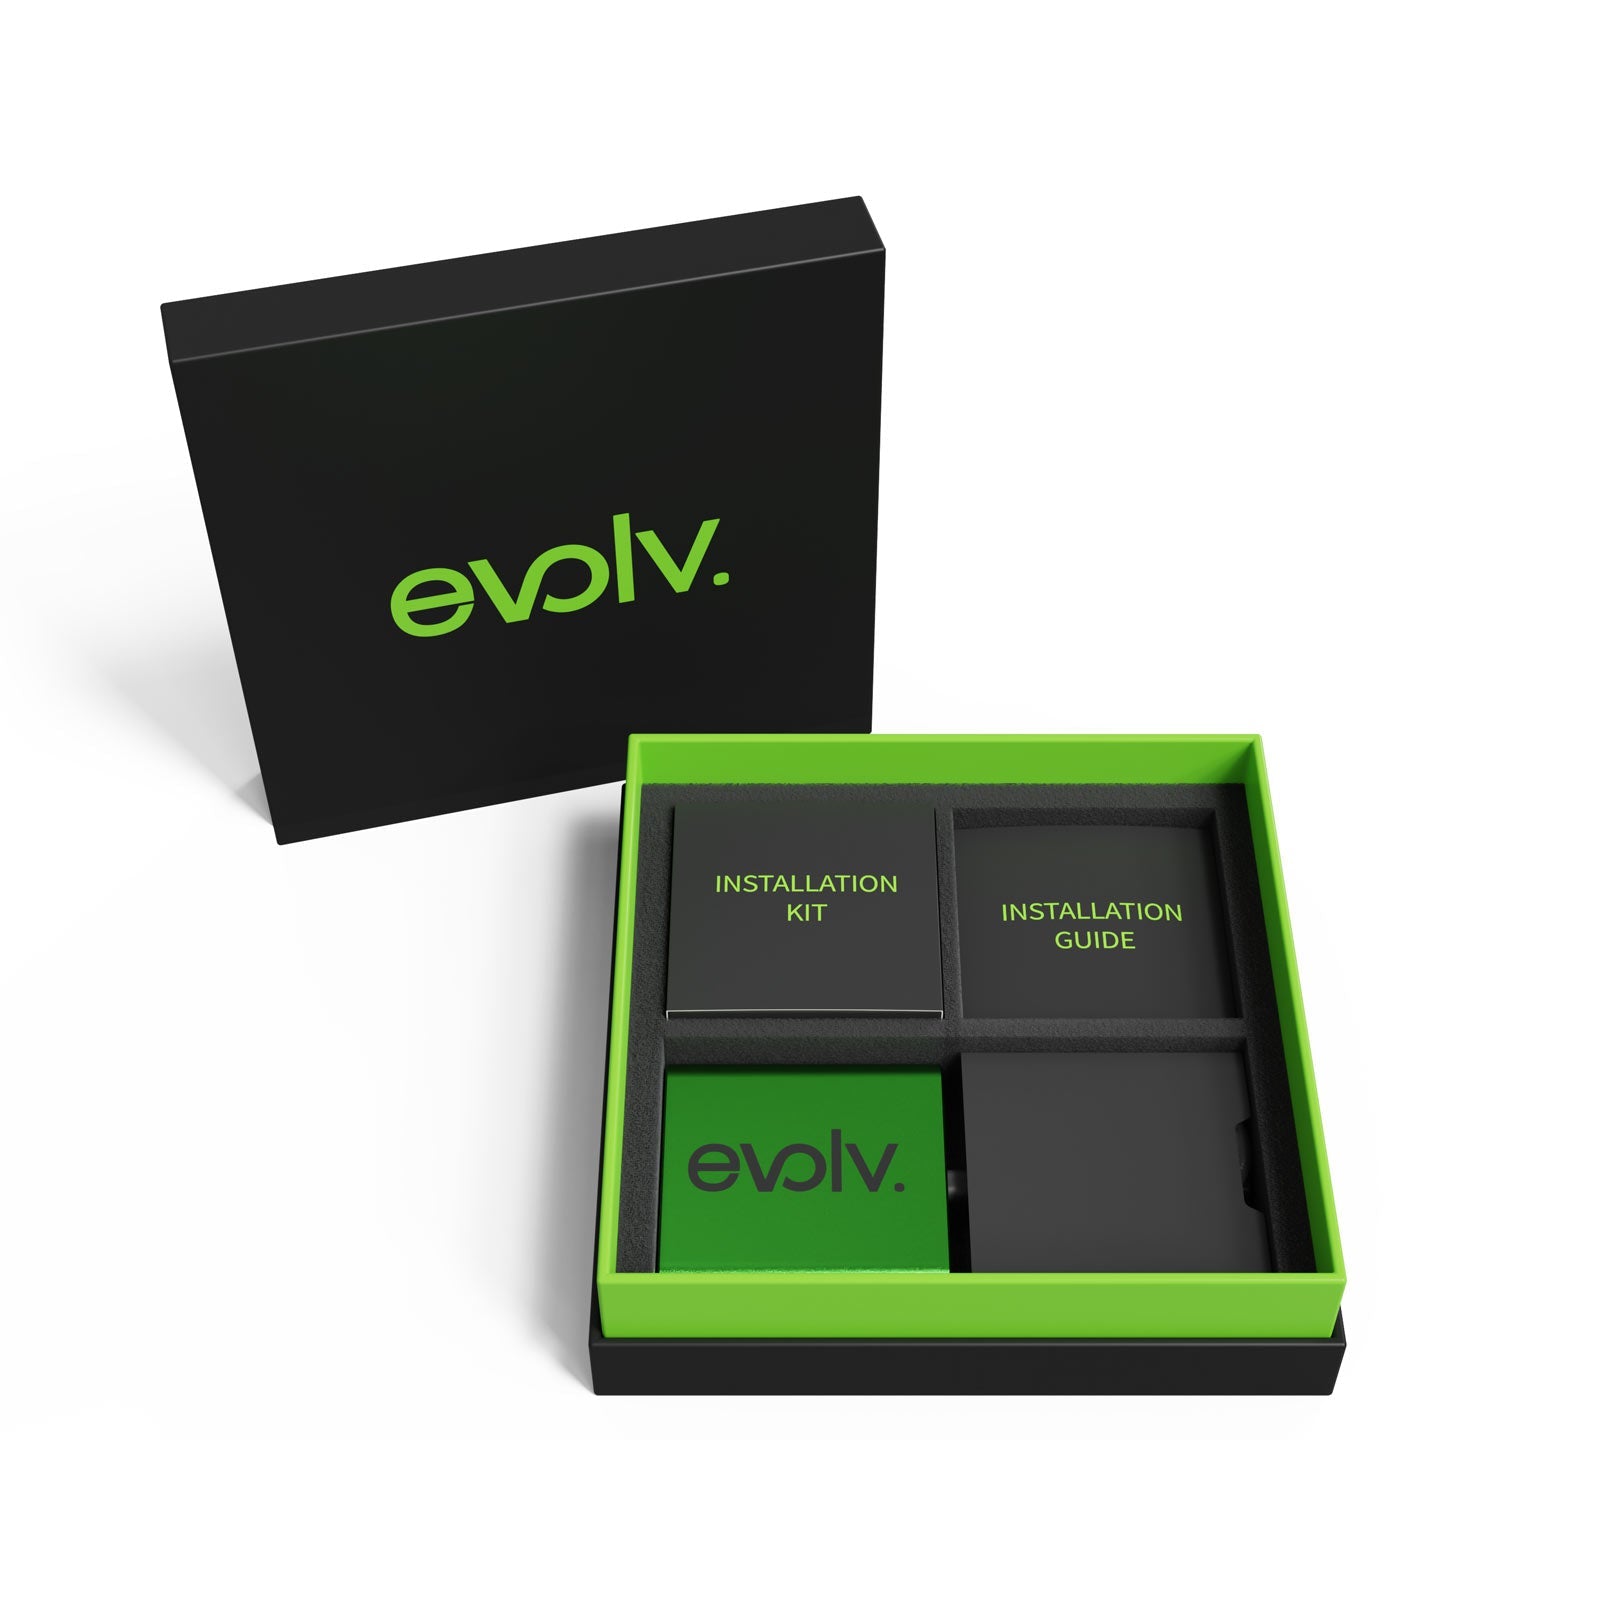 Increase your fuel mileage, performance and throttle response with an Evolv Chevrolet G-Series Van Performance Chip!